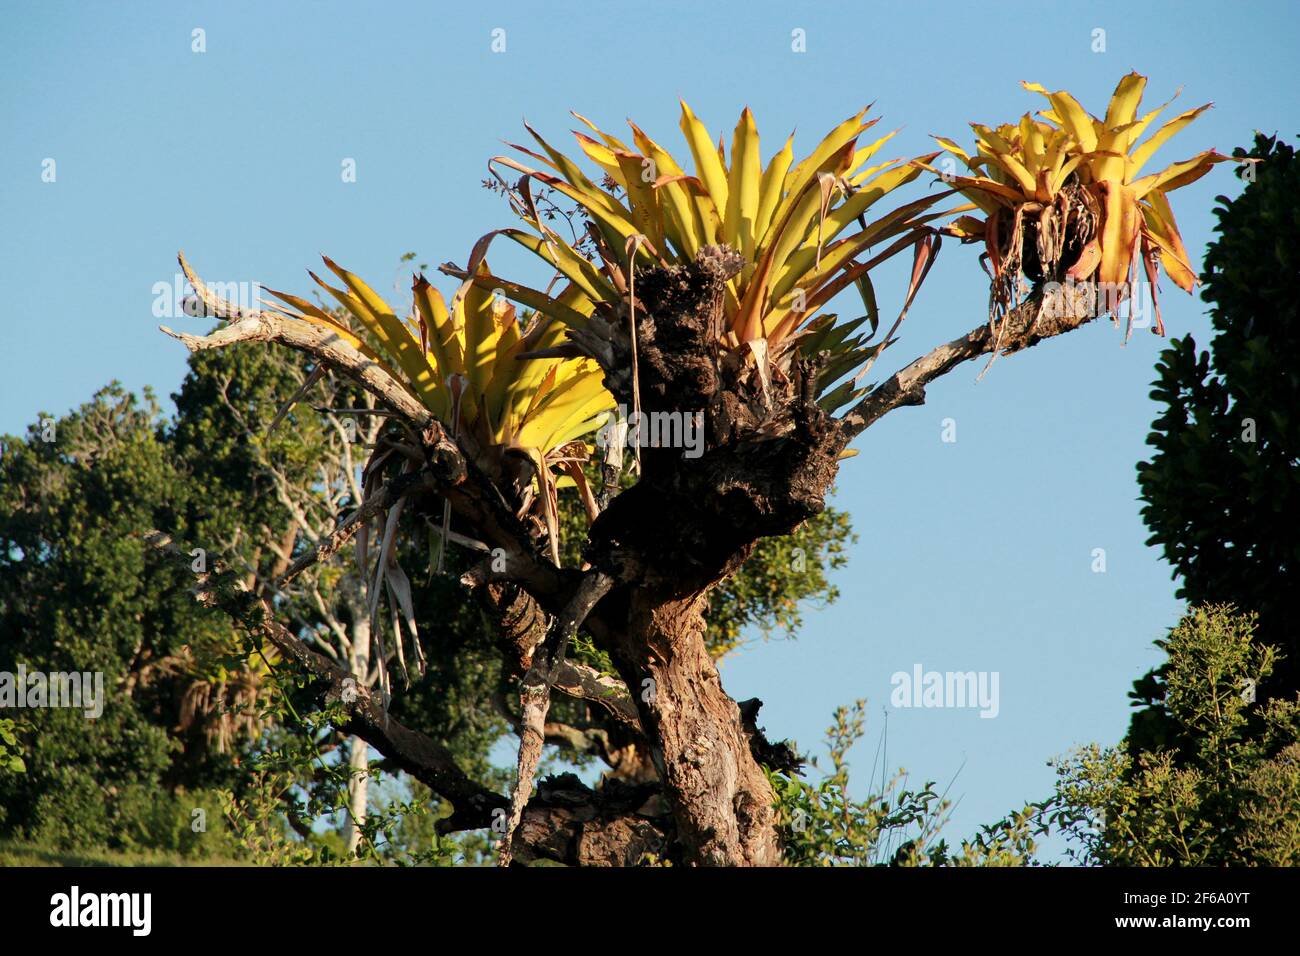 conde, bahia / brazil - september 15, 2012: bromelia is seen in the countryside of the city of Conde.  *** Local Caption ***   . Stock Photo